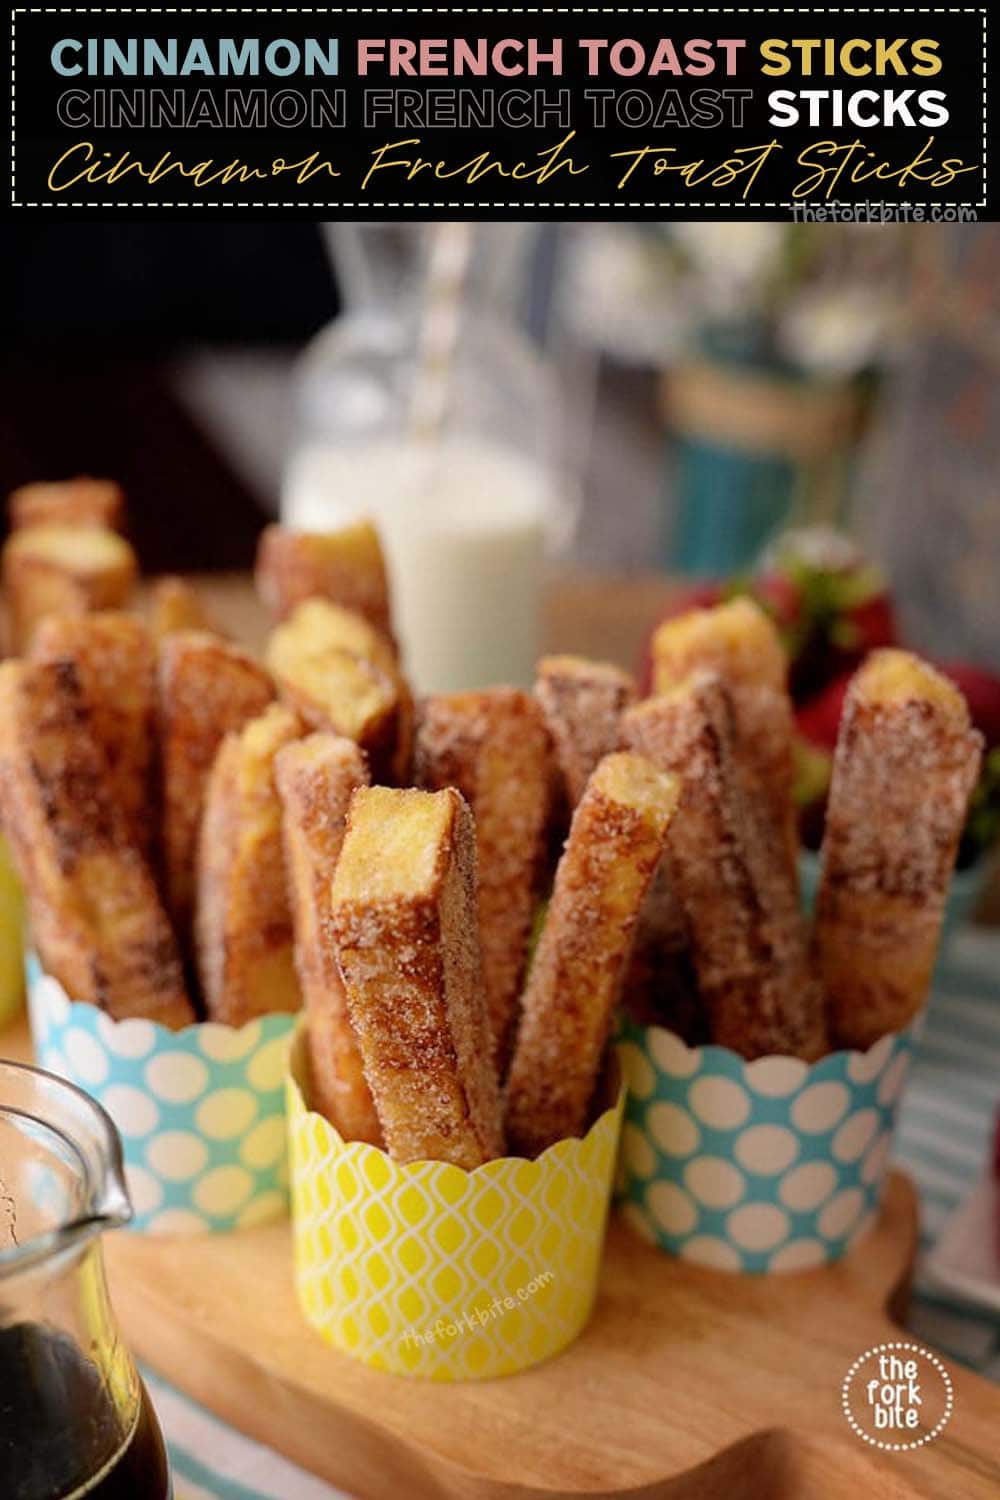 Easy Cinnamon French Toast Sticks – Breakfast you can eat with your fingers and dip in syrup, rather than pour syrup all over it.